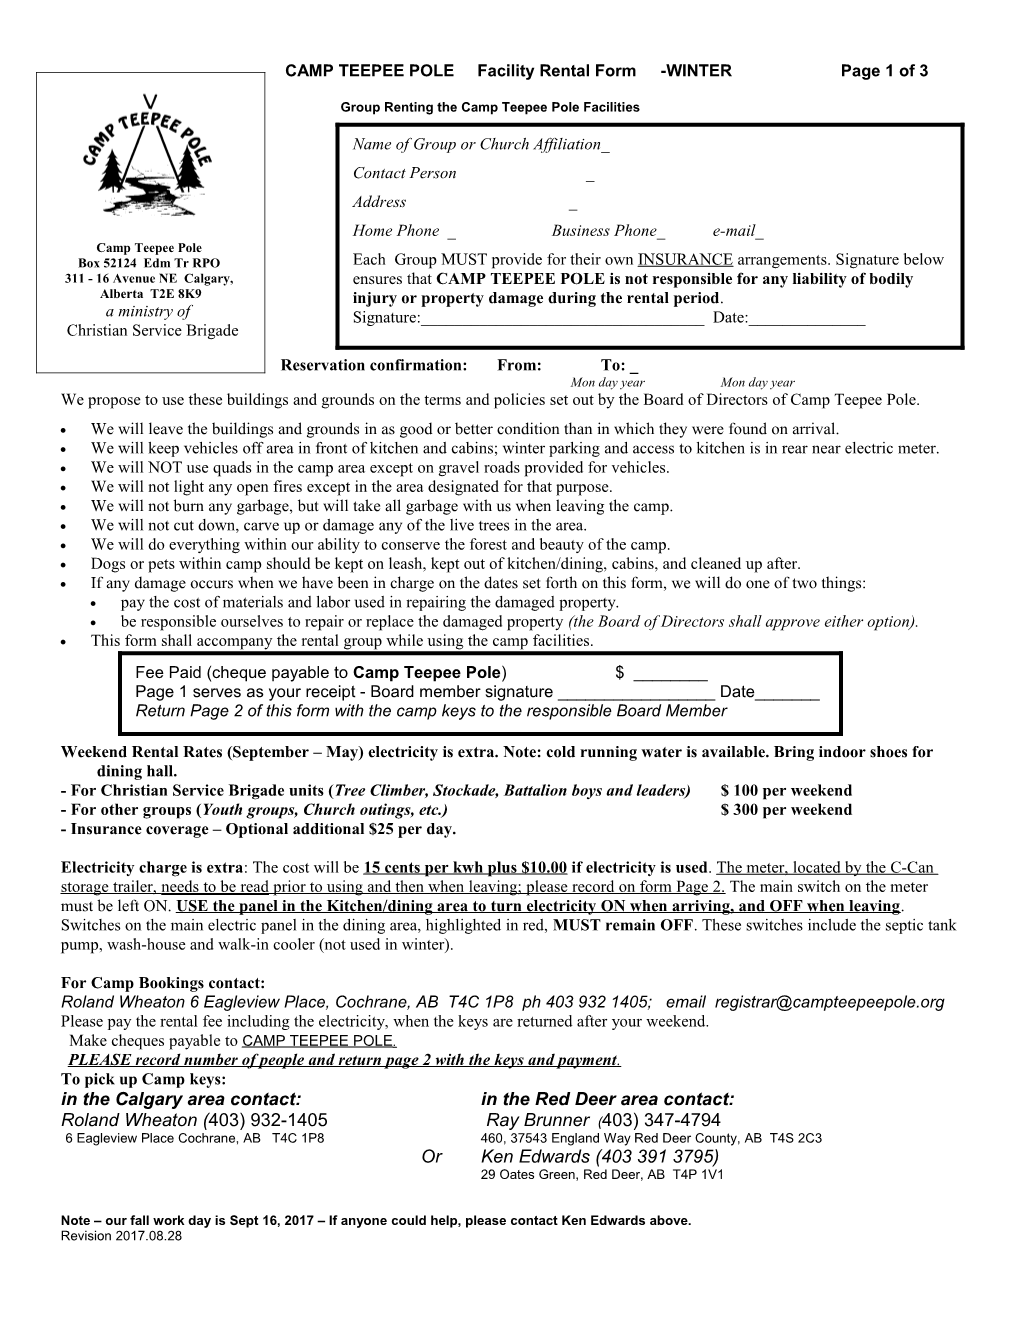 CAMP TEEPEE POLE Facility Rental Form-Winterpage 1 of 3